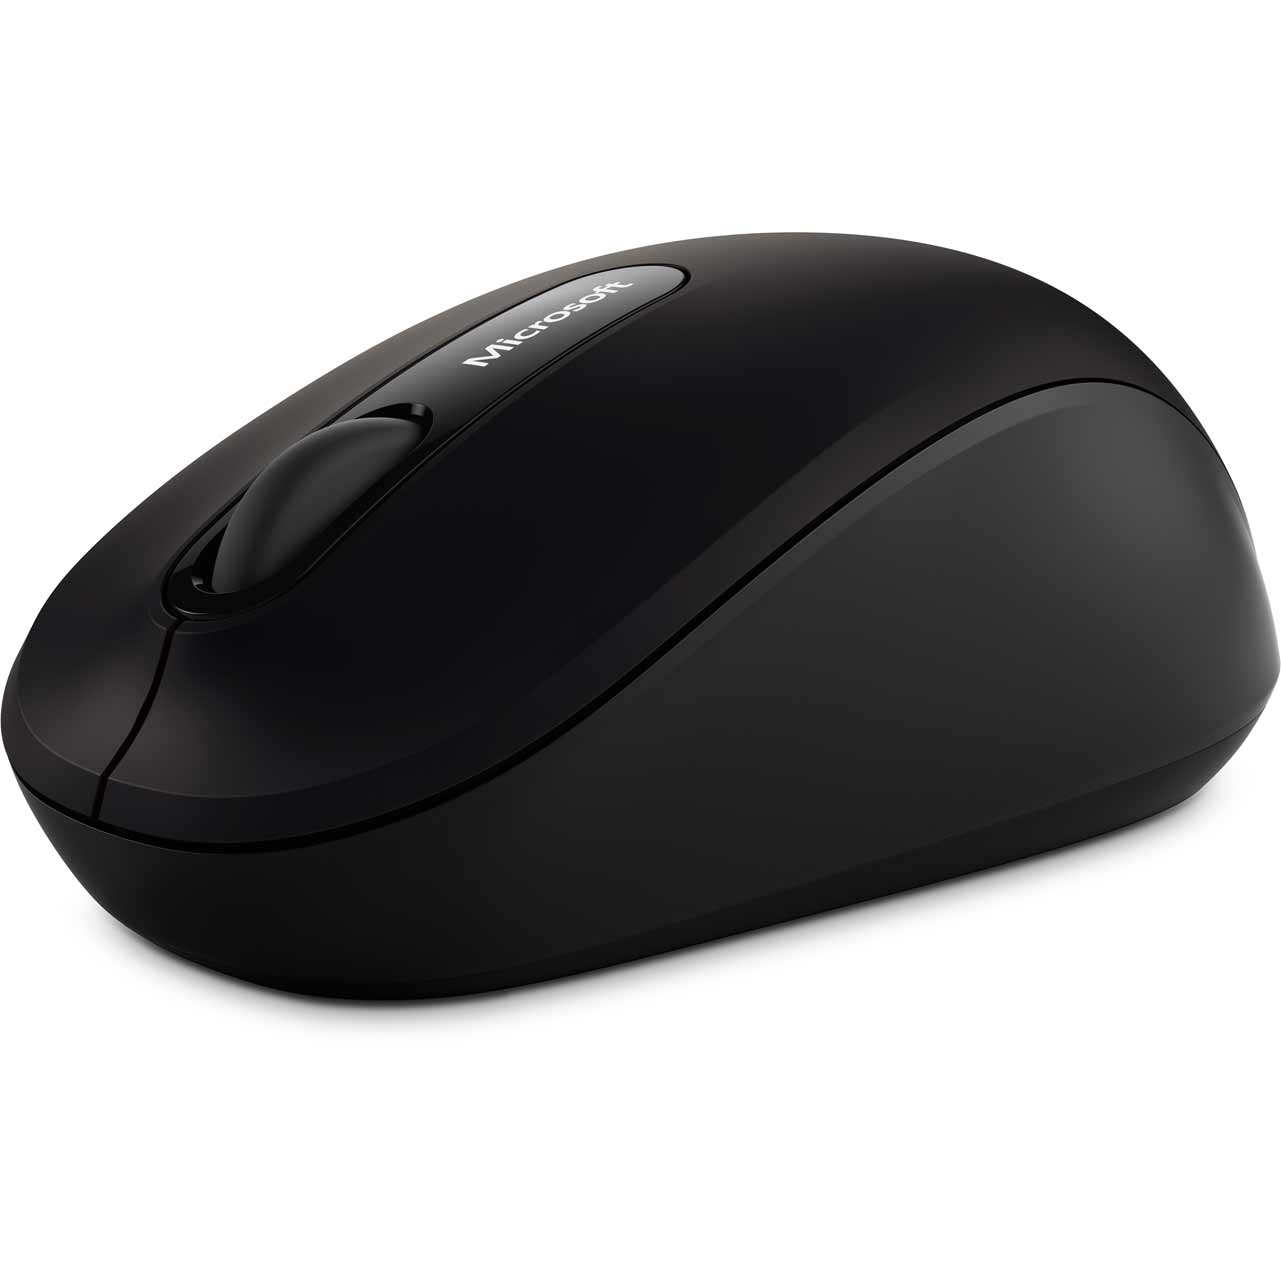 Microsoft Bluetooth 4.0 Mobile Optical Mouse Model. 3600 for Tablets, Laptops etc.